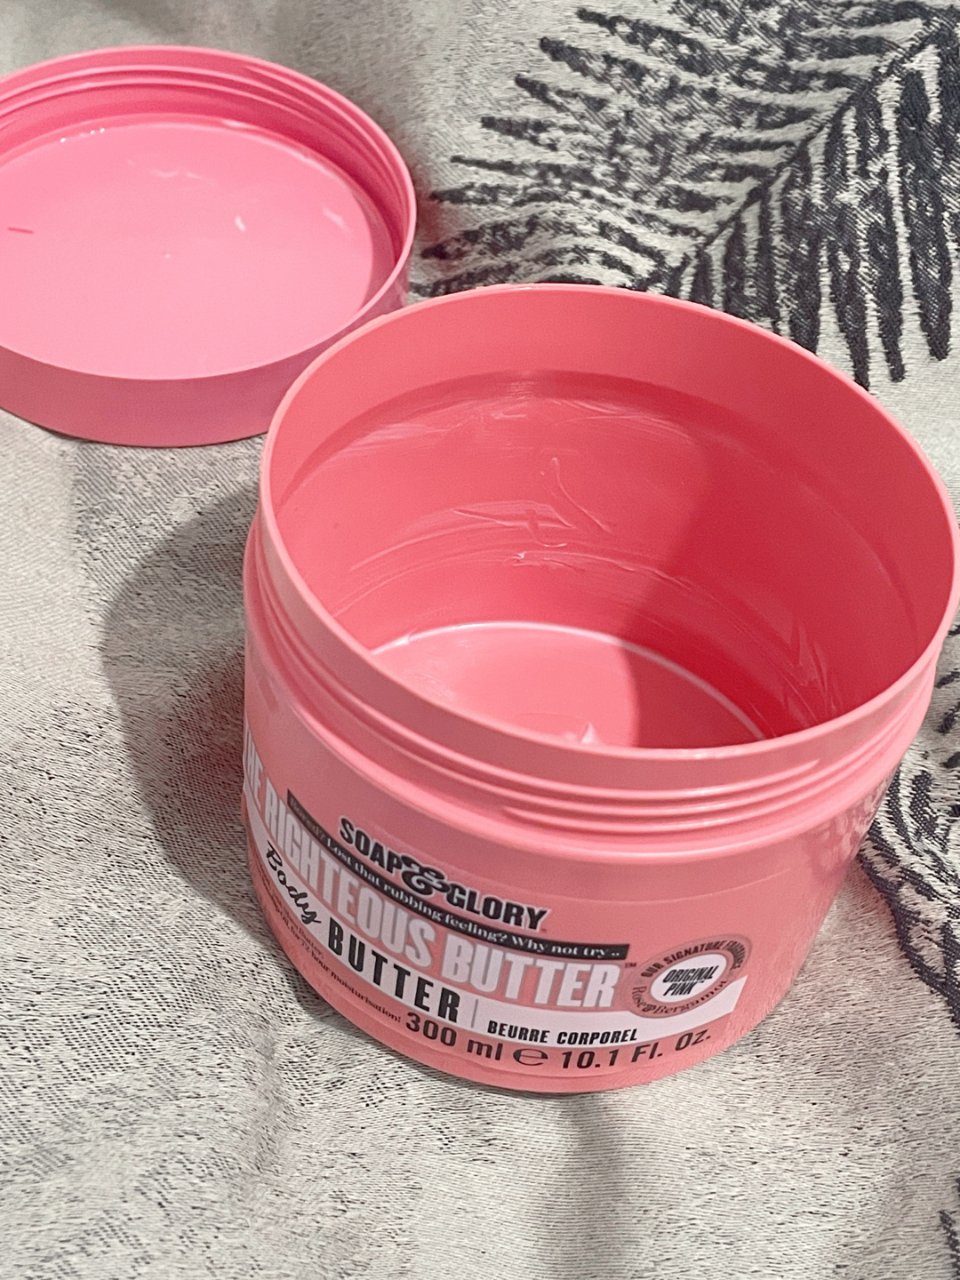 Soap & Glory Righteous Butter 300ml - Boots